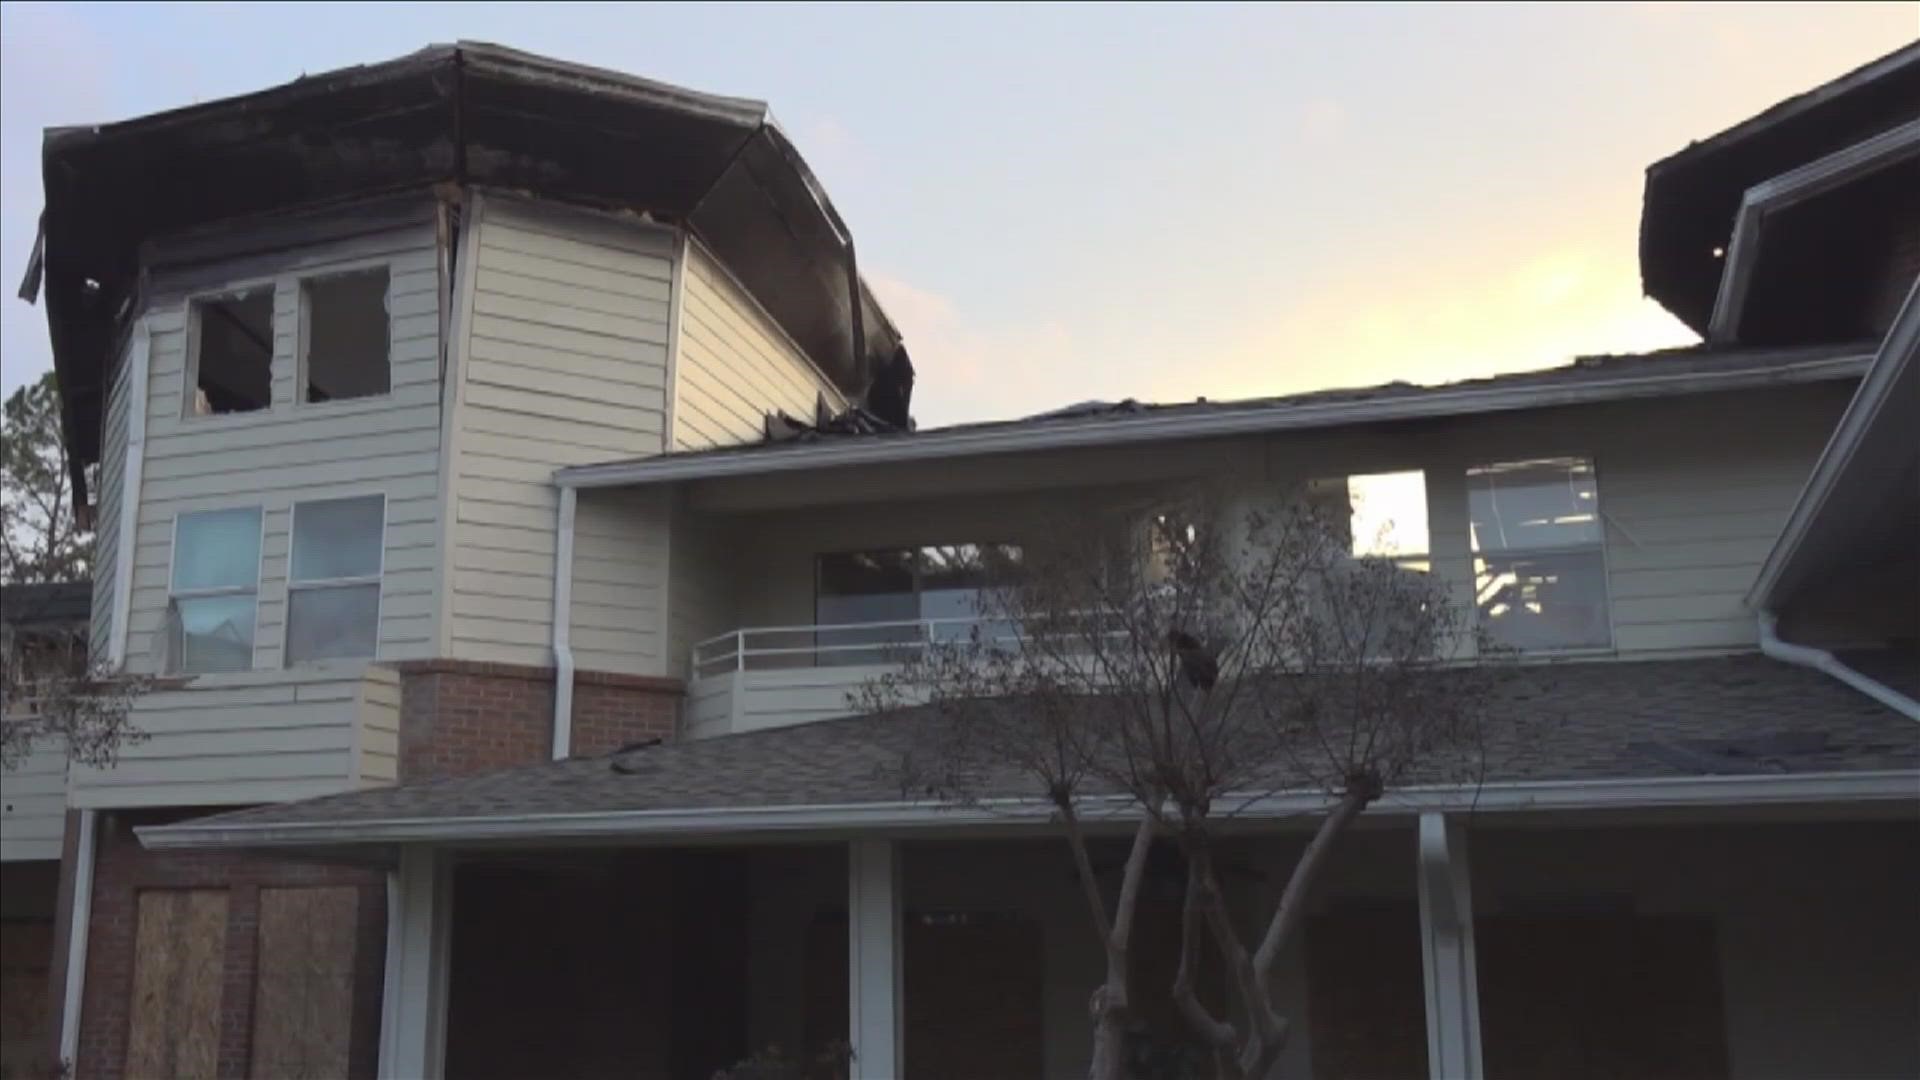 The deadly fire that took place in December at a senior lifestyle residence home was caused by an electrical failure from a light fixture, according to MFD.